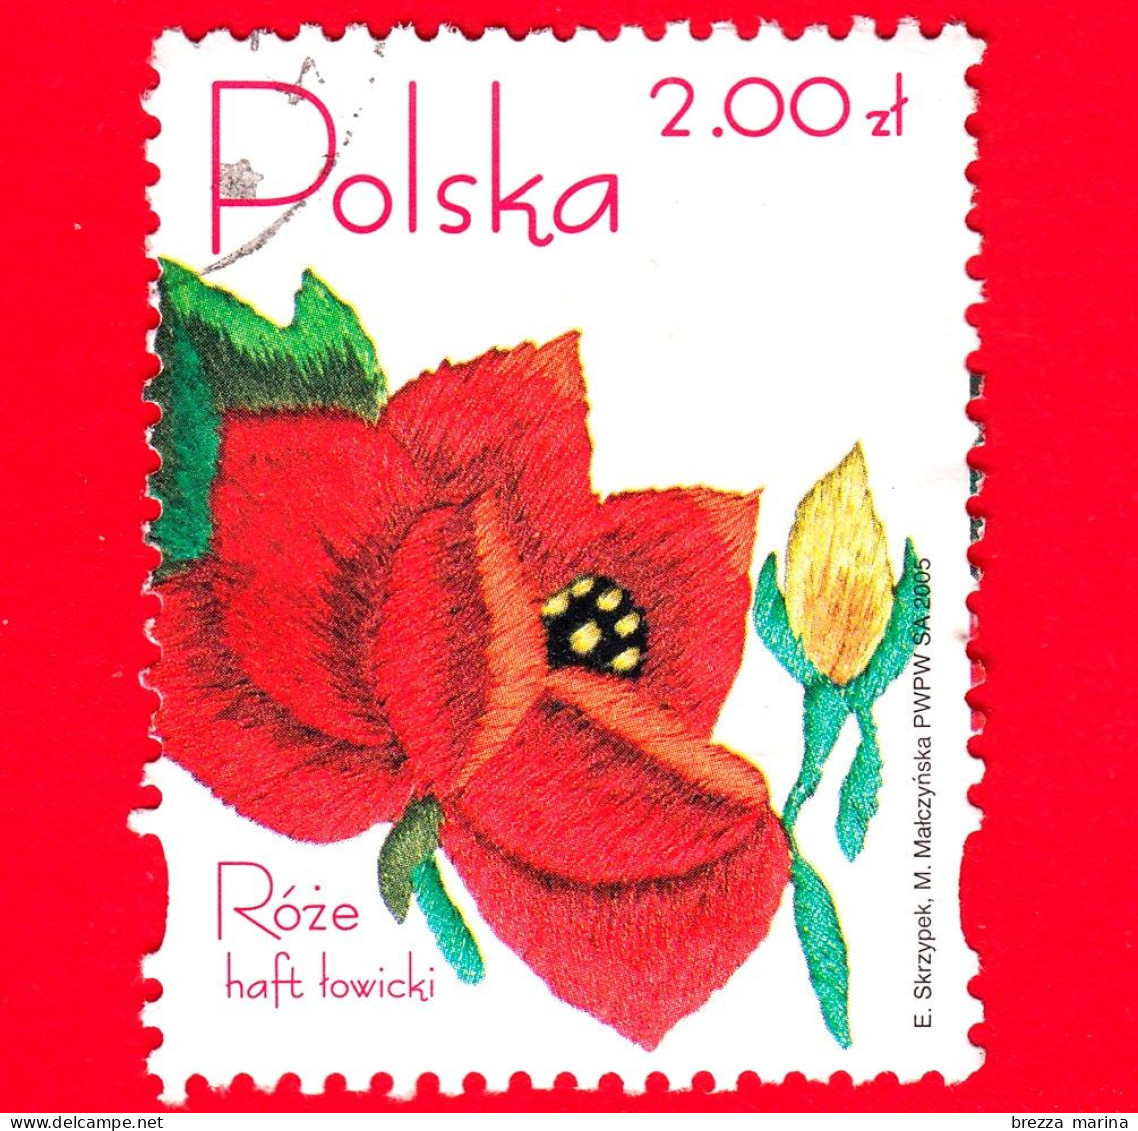 POLONIA - Usato -2005 - Regione Di Lowicz 1 - Rose Ricamate - 2.00 - Used Stamps